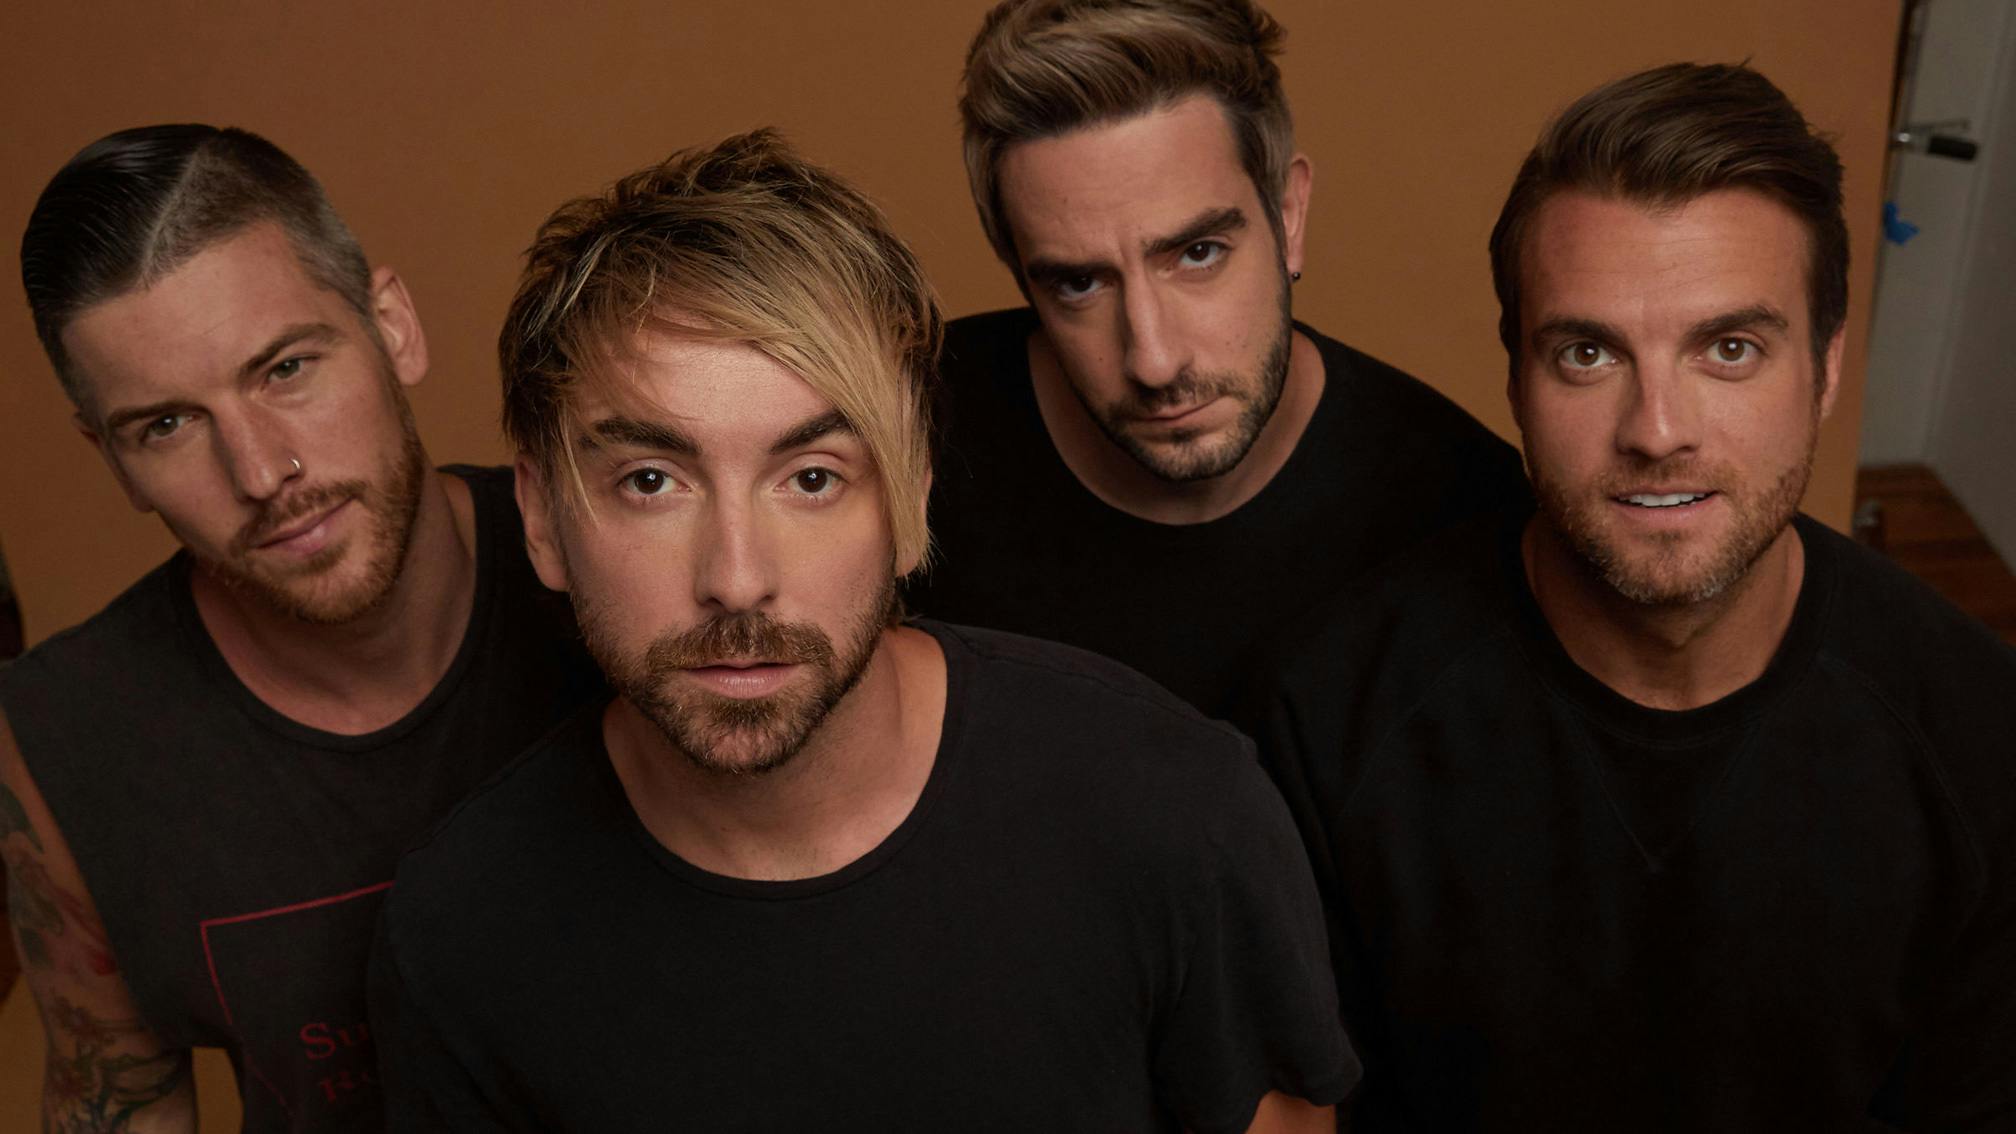 Alex Gaskarth: “We’re learning where All Time Low is able to go in the current landscape of music… That’s really exciting”